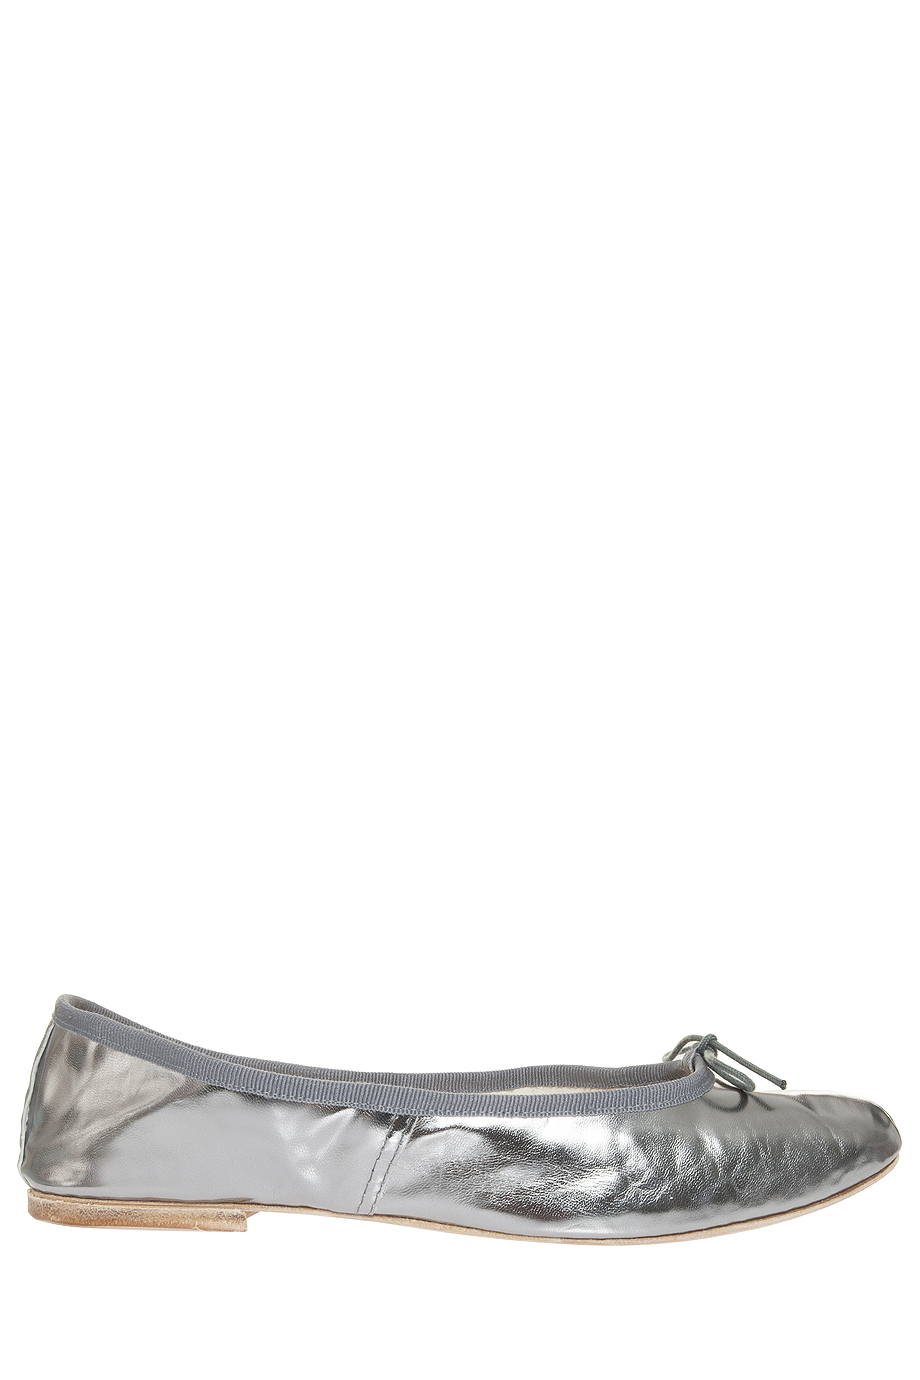 Porselli Leather Flat Ballerina Shoes in Silver (Metallic) - Lyst